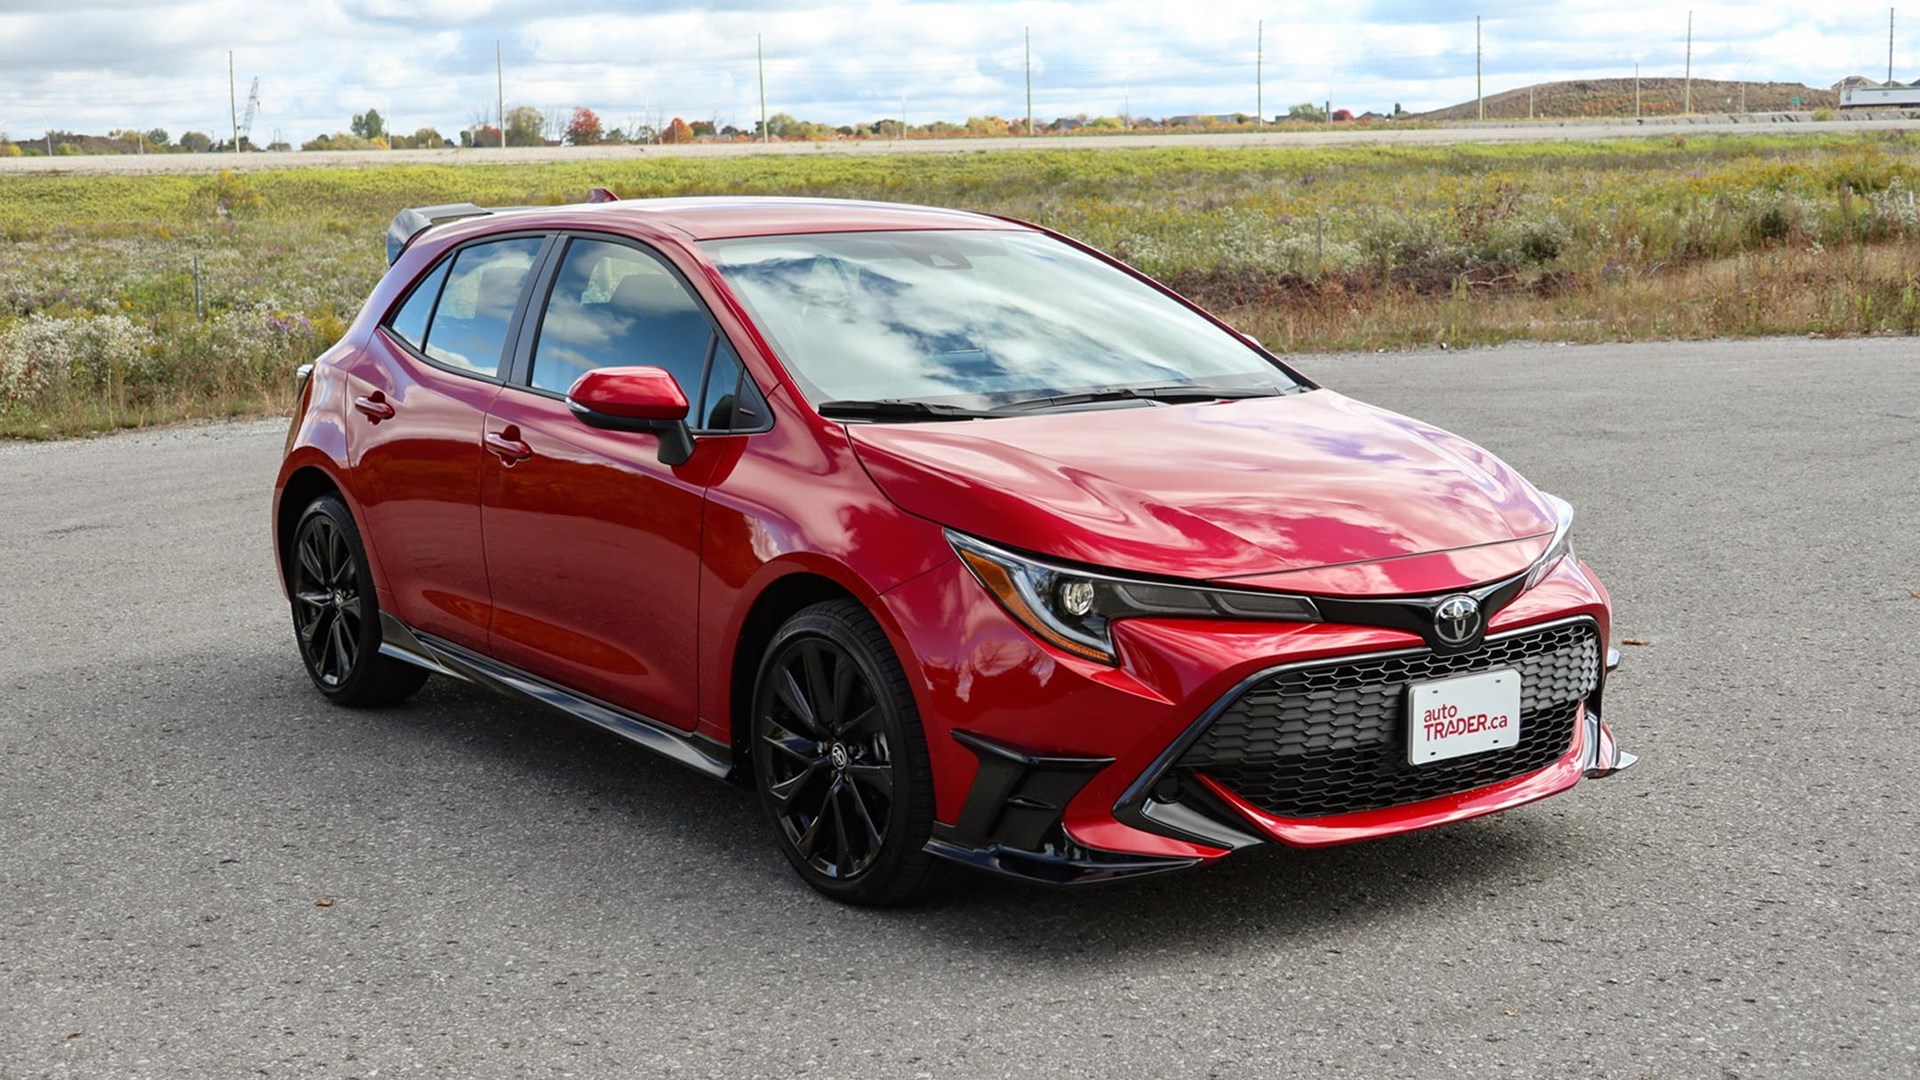 2021 Toyota Corolla Hatchback Review | AutoTrader.ca